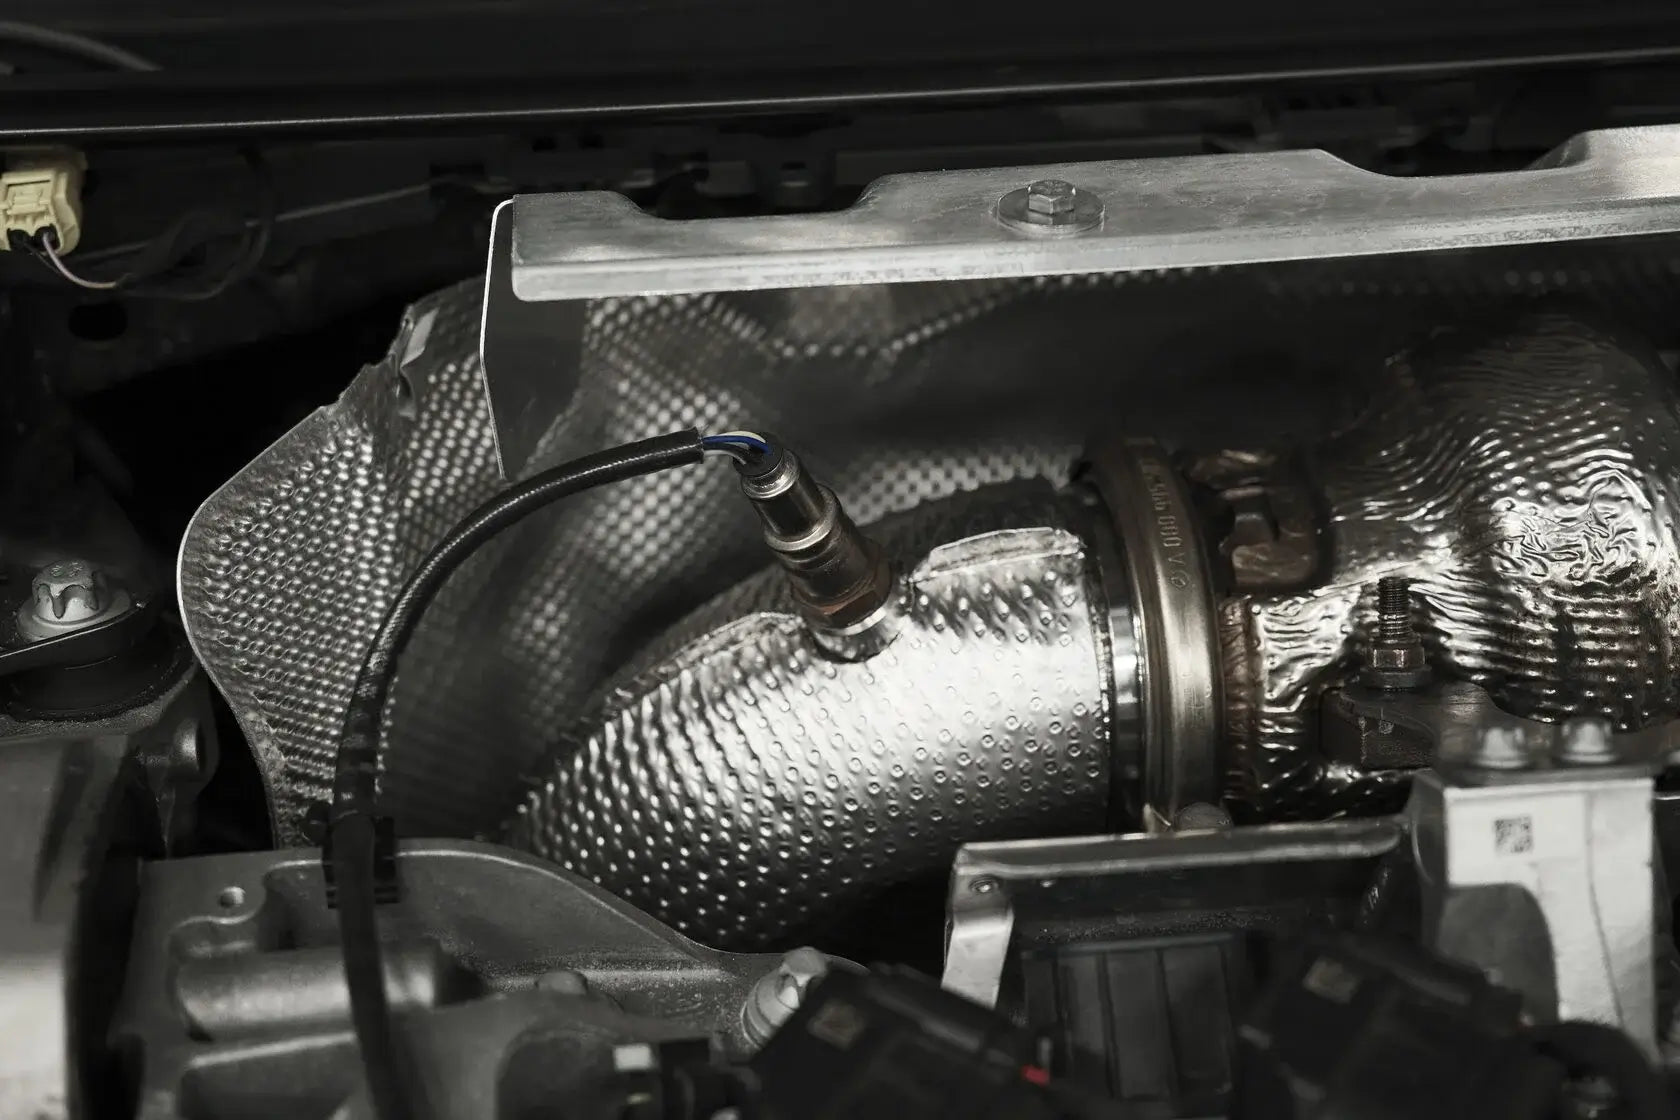 DEIKIN 10-MB.A45S.W177-DP Downpipe for Mercedes-AMG A45 S (W177) without HeatShield Photo-3 